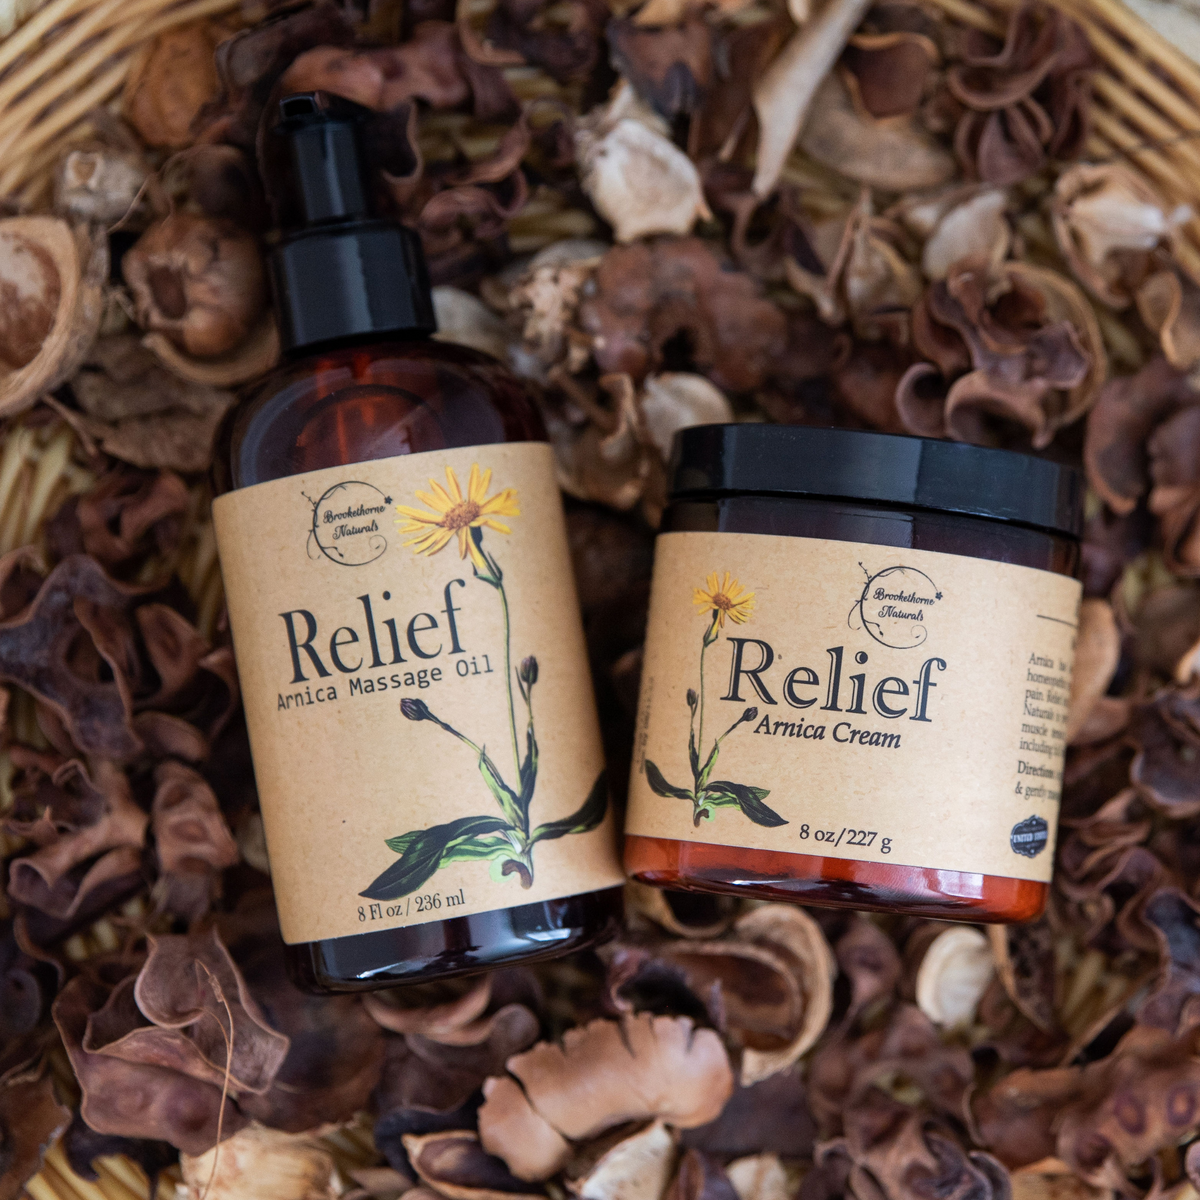 Sweet Relief Arnica Bundle; Relief Arnica Massage Oil and Relief Arnica Cream